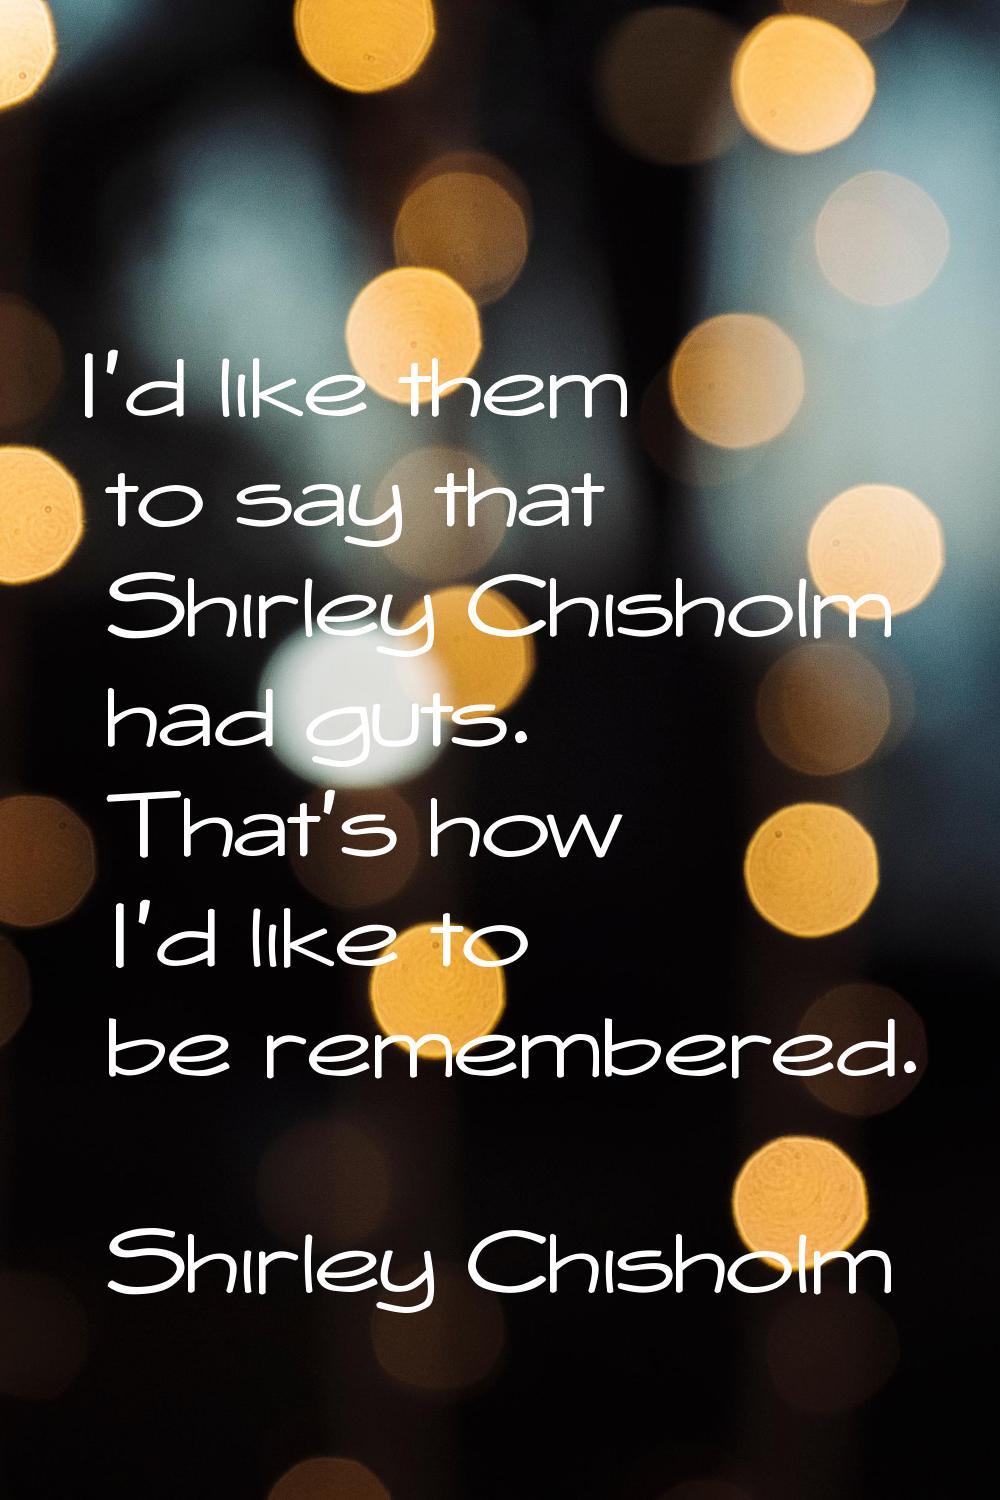 I'd like them to say that Shirley Chisholm had guts. That's how I'd like to be remembered.